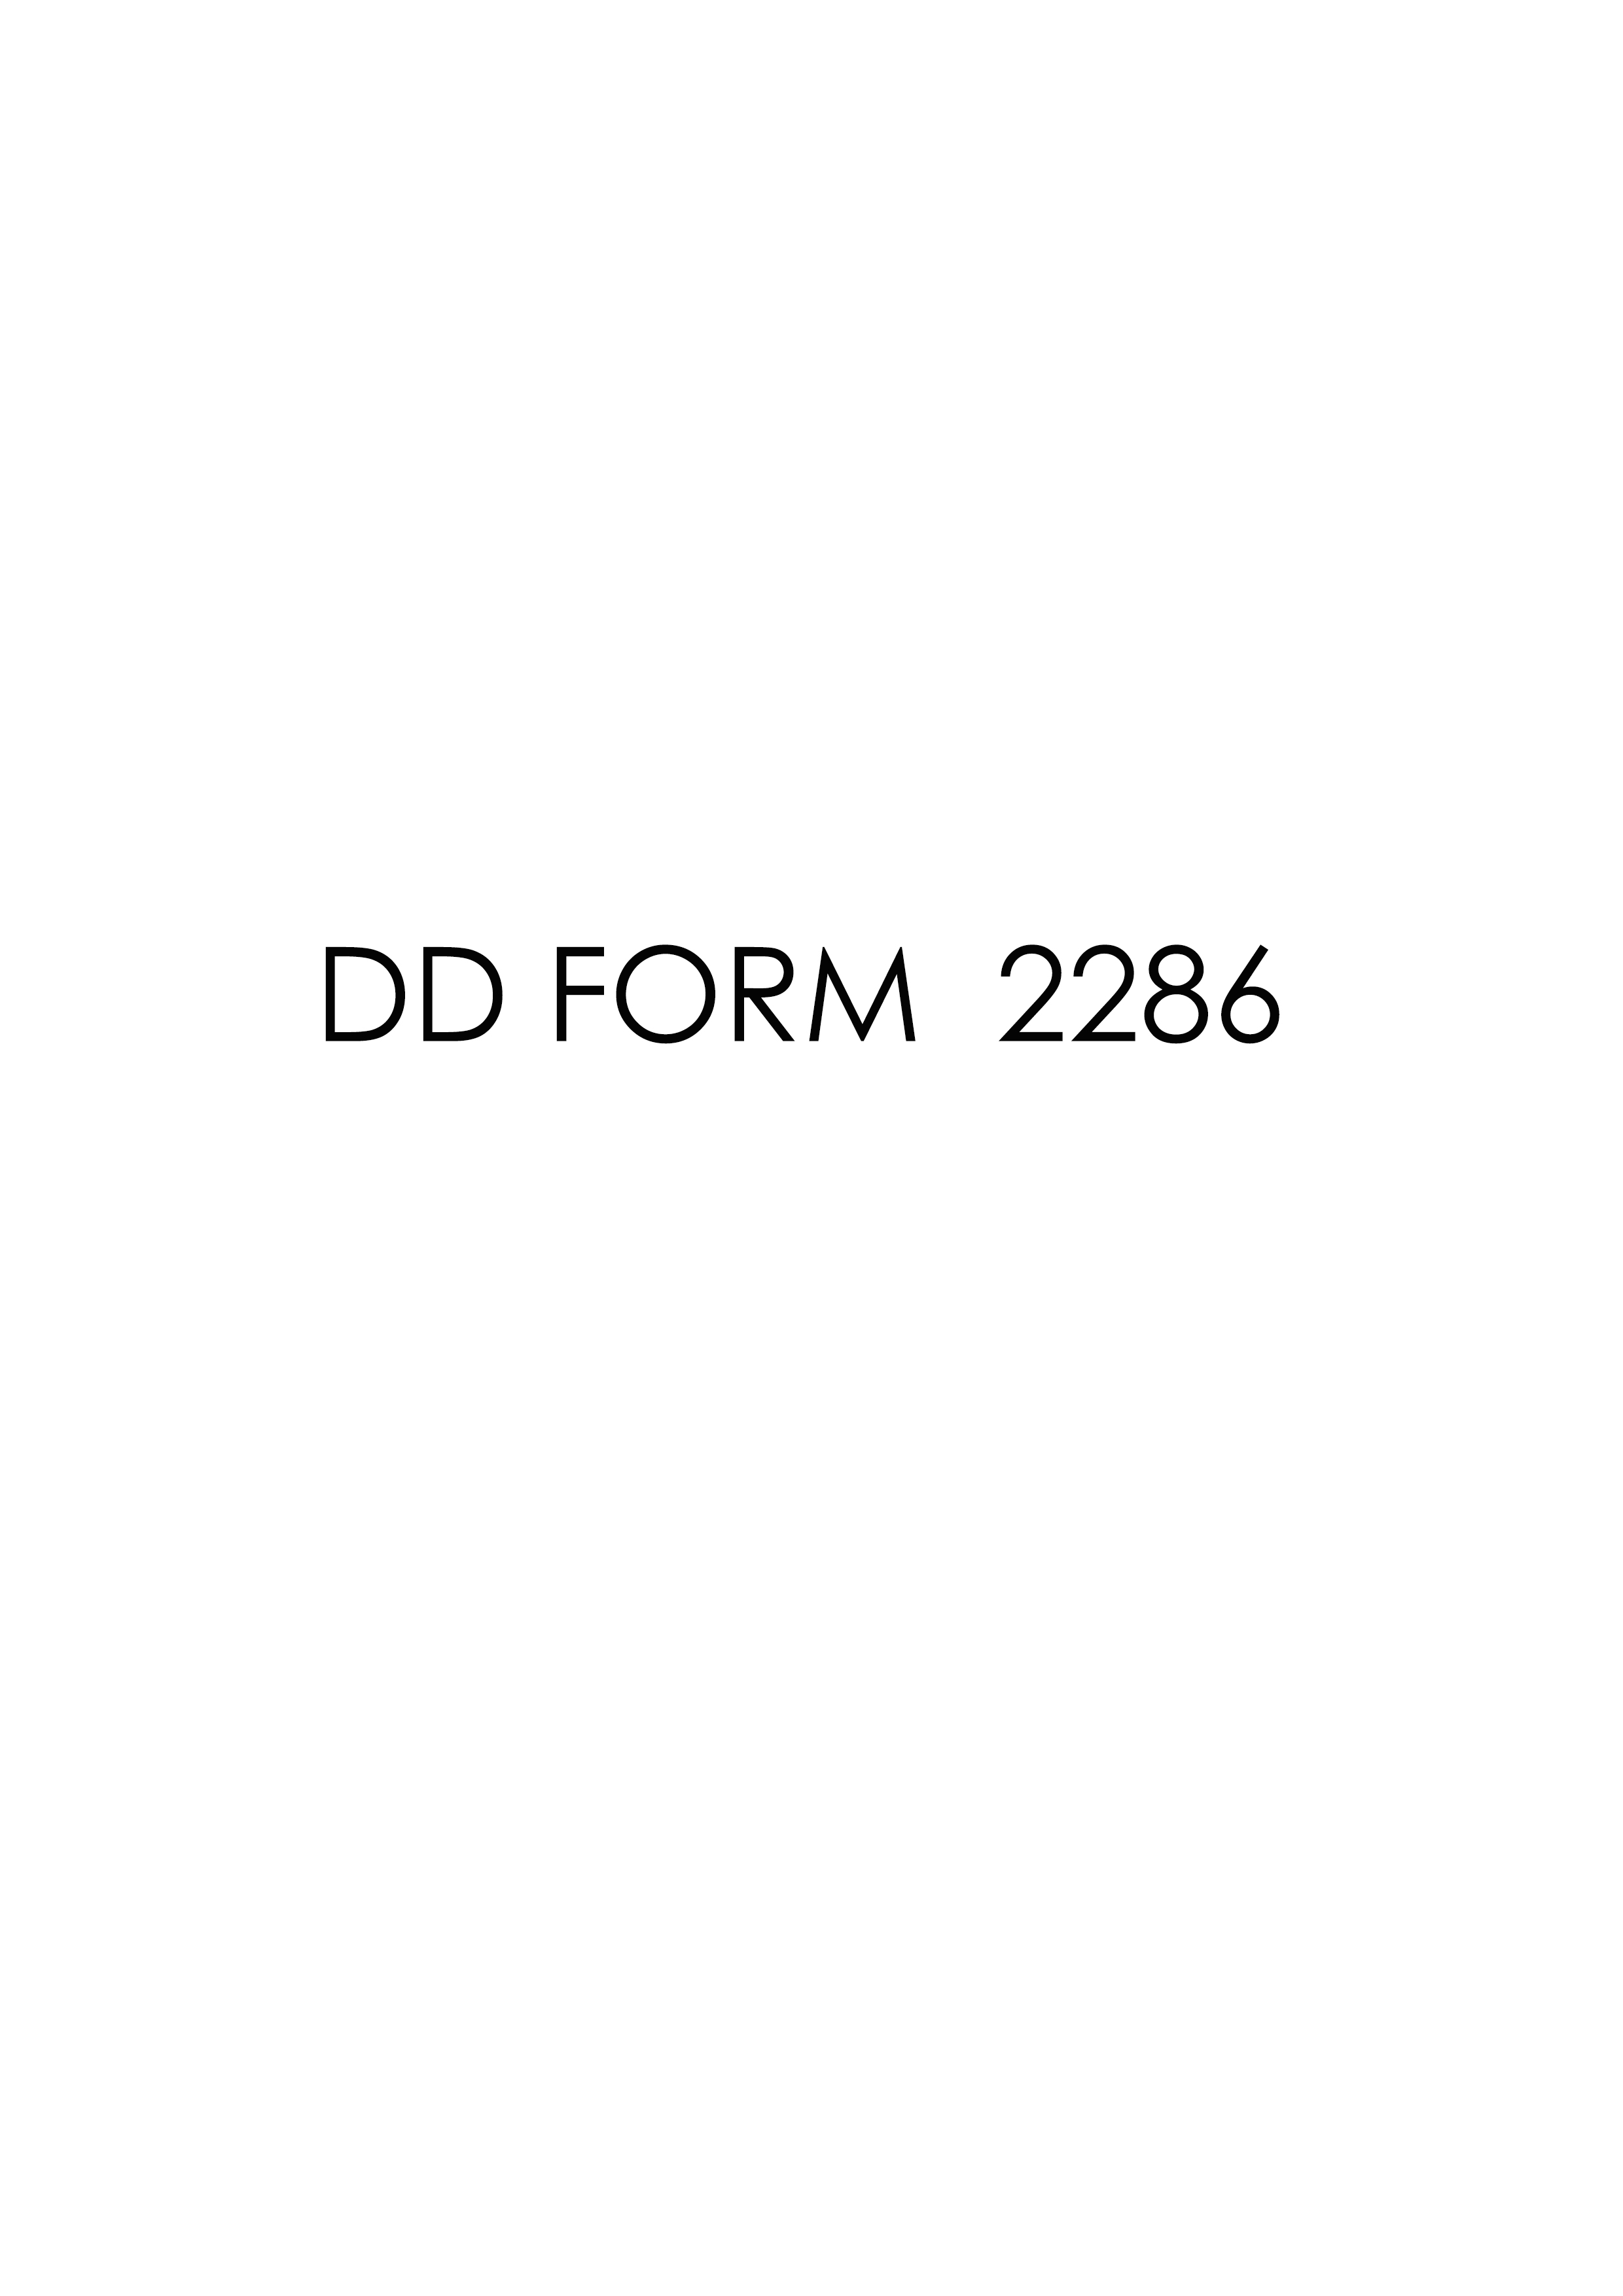 Download Fillable dd Form 2286